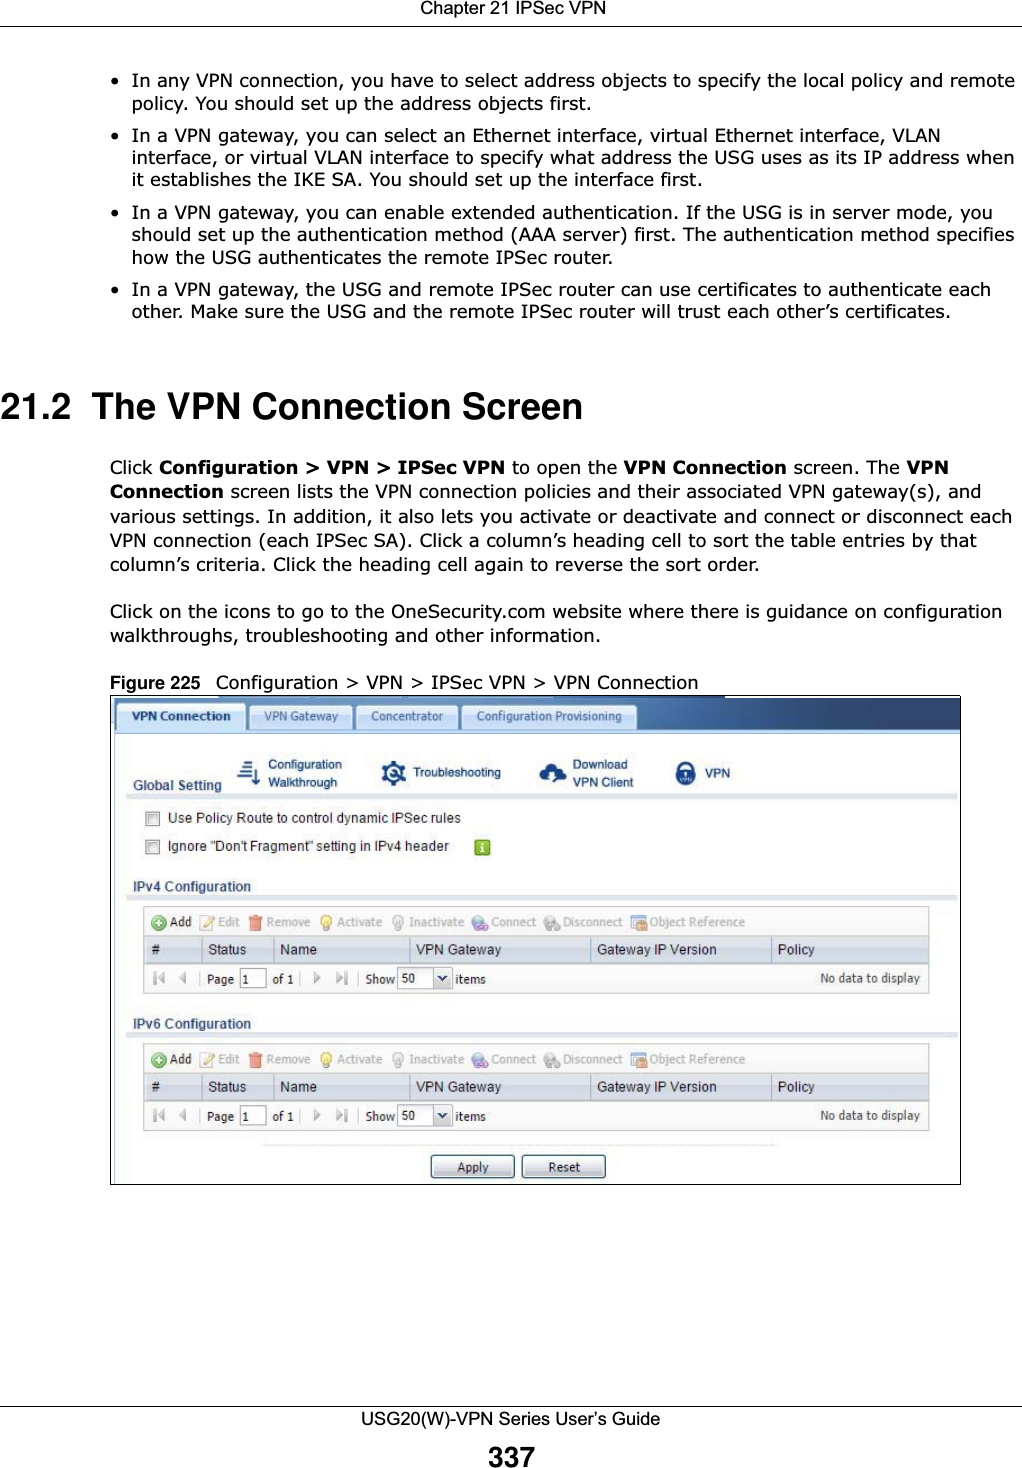  Chapter 21 IPSec VPNUSG20(W)-VPN Series User’s Guide337• In any VPN connection, you have to select address objects to specify the local policy and remote policy. You should set up the address objects first.• In a VPN gateway, you can select an Ethernet interface, virtual Ethernet interface, VLAN interface, or virtual VLAN interface to specify what address the USG uses as its IP address when it establishes the IKE SA. You should set up the interface first. • In a VPN gateway, you can enable extended authentication. If the USG is in server mode, you should set up the authentication method (AAA server) first. The authentication method specifies how the USG authenticates the remote IPSec router. • In a VPN gateway, the USG and remote IPSec router can use certificates to authenticate each other. Make sure the USG and the remote IPSec router will trust each other’s certificates.21.2  The VPN Connection ScreenClick Configuration &gt; VPN &gt; IPSec VPN to open the VPN Connection screen. The VPNConnection screen lists the VPN connection policies and their associated VPN gateway(s), and various settings. In addition, it also lets you activate or deactivate and connect or disconnect each VPN connection (each IPSec SA). Click a column’s heading cell to sort the table entries by that column’s criteria. Click the heading cell again to reverse the sort order.Click on the icons to go to the OneSecurity.com website where there is guidance on configuration walkthroughs, troubleshooting and other information.Figure 225   Configuration &gt; VPN &gt; IPSec VPN &gt; VPN Connection